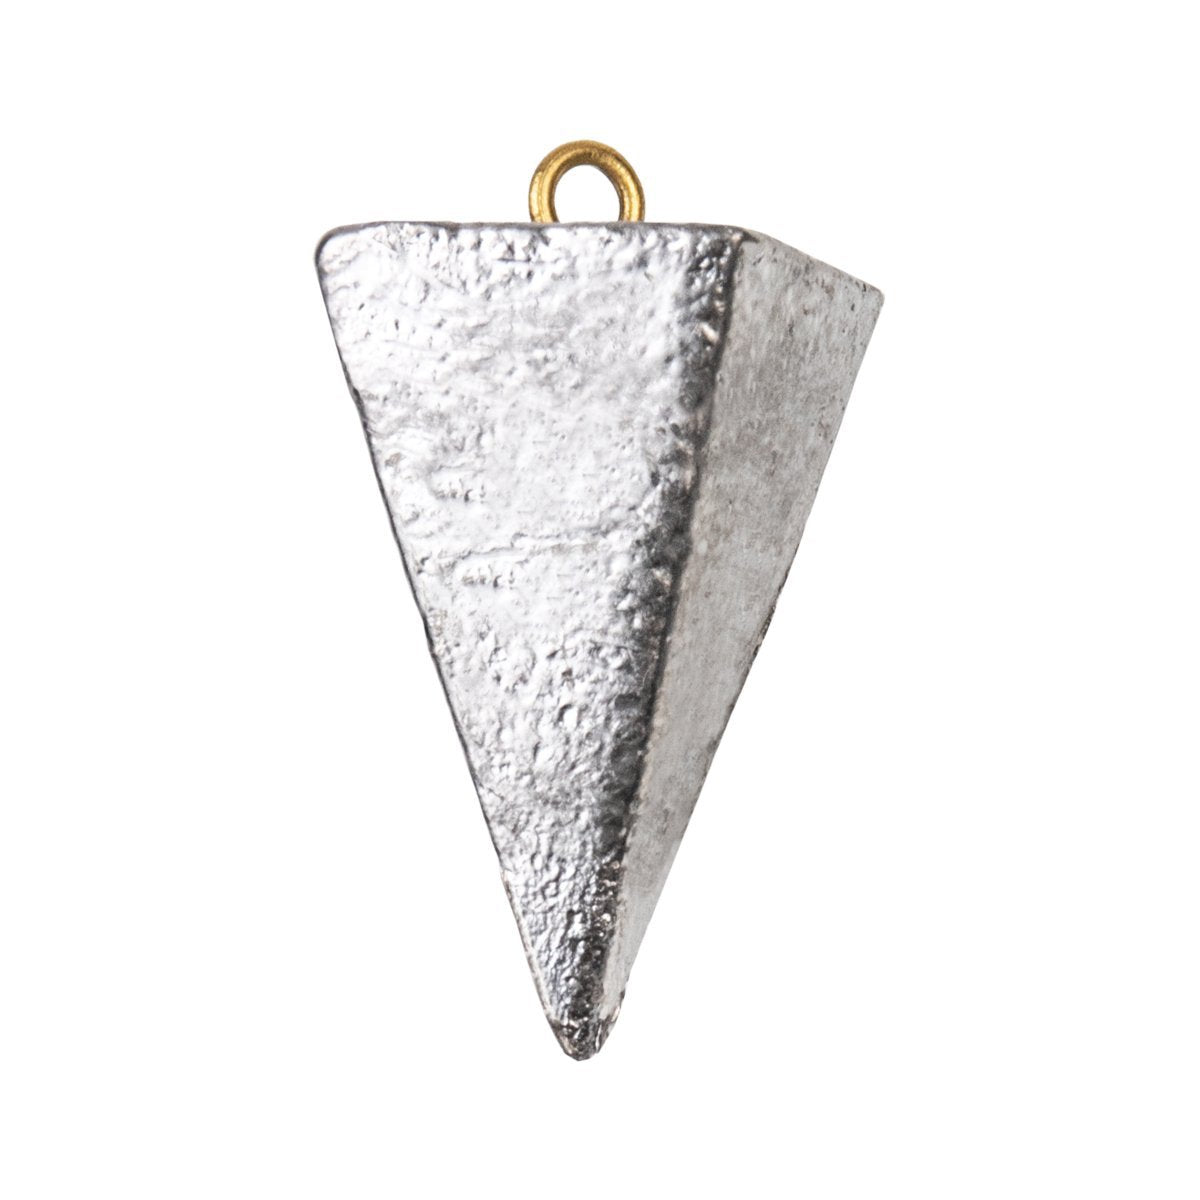  Pyramid Sinkers Weights For Fishing Weights